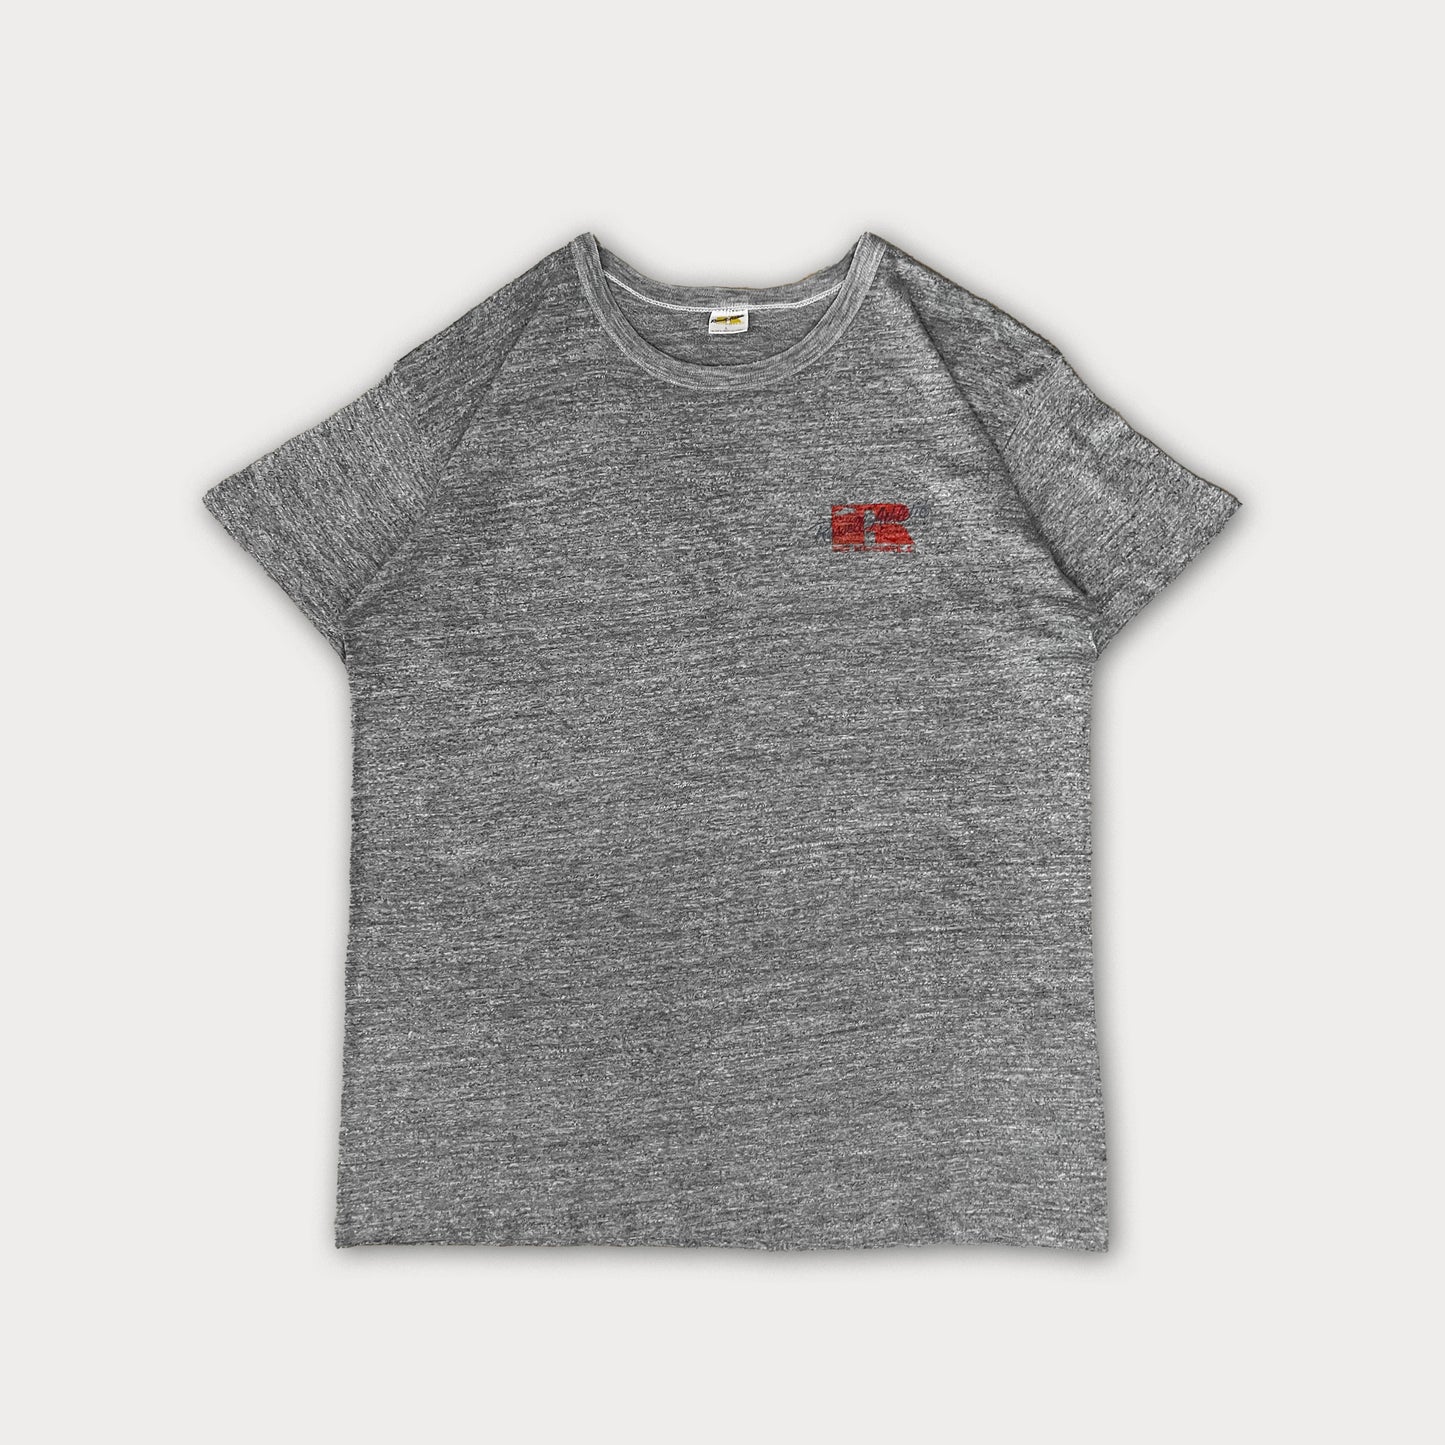 80s Russel Athletics Tee - Single Stitched